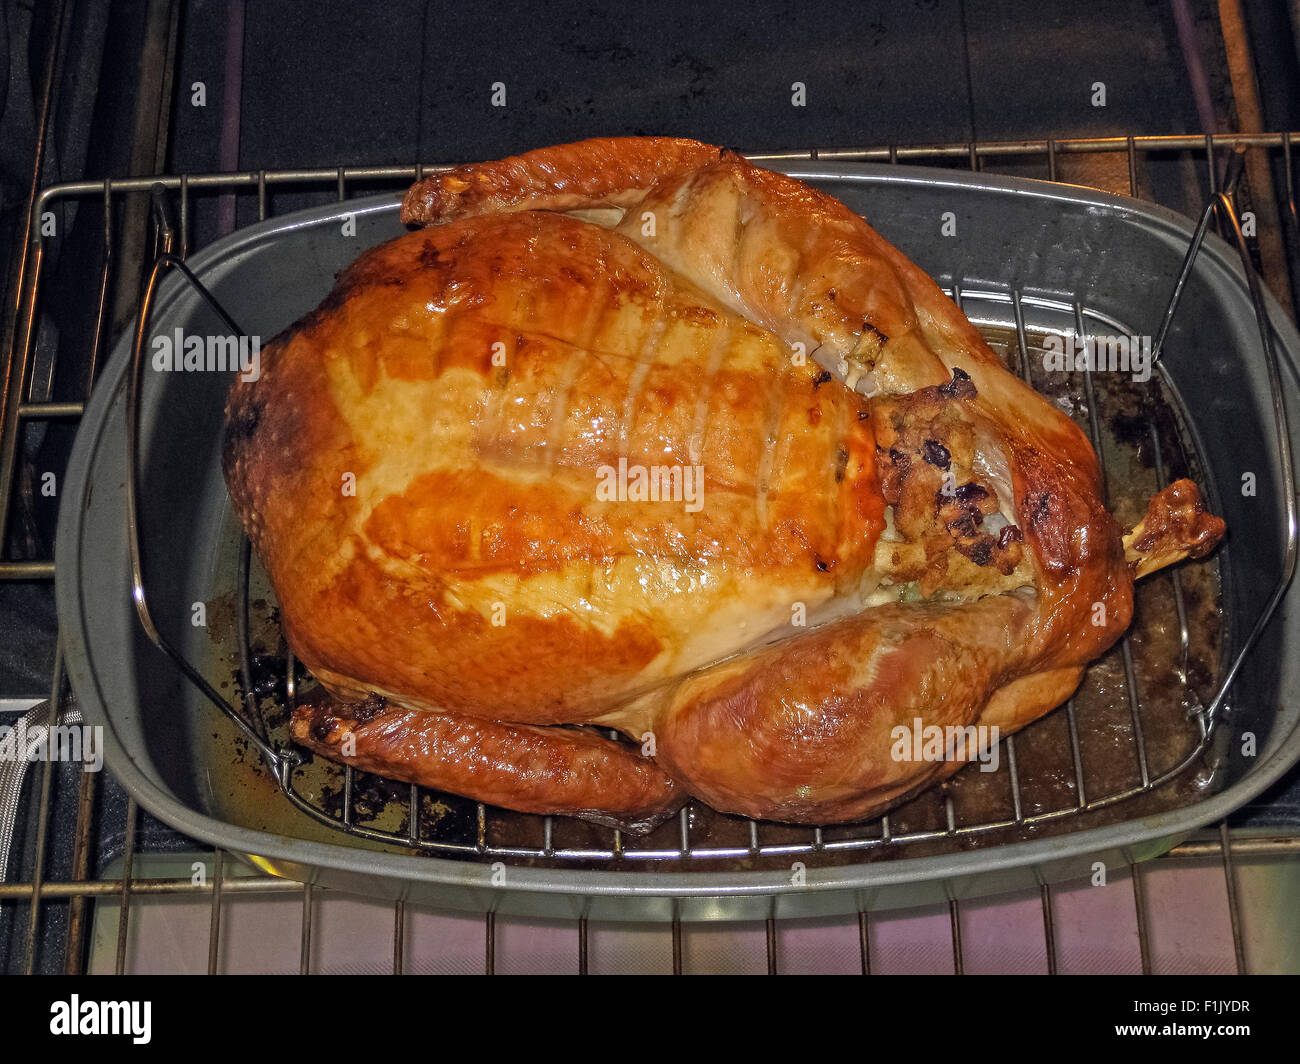 A golden oven-roasted turkey in a pan cools on the oven rack before being served at a Thanksgiving Day dinner in United States. Stock Photo